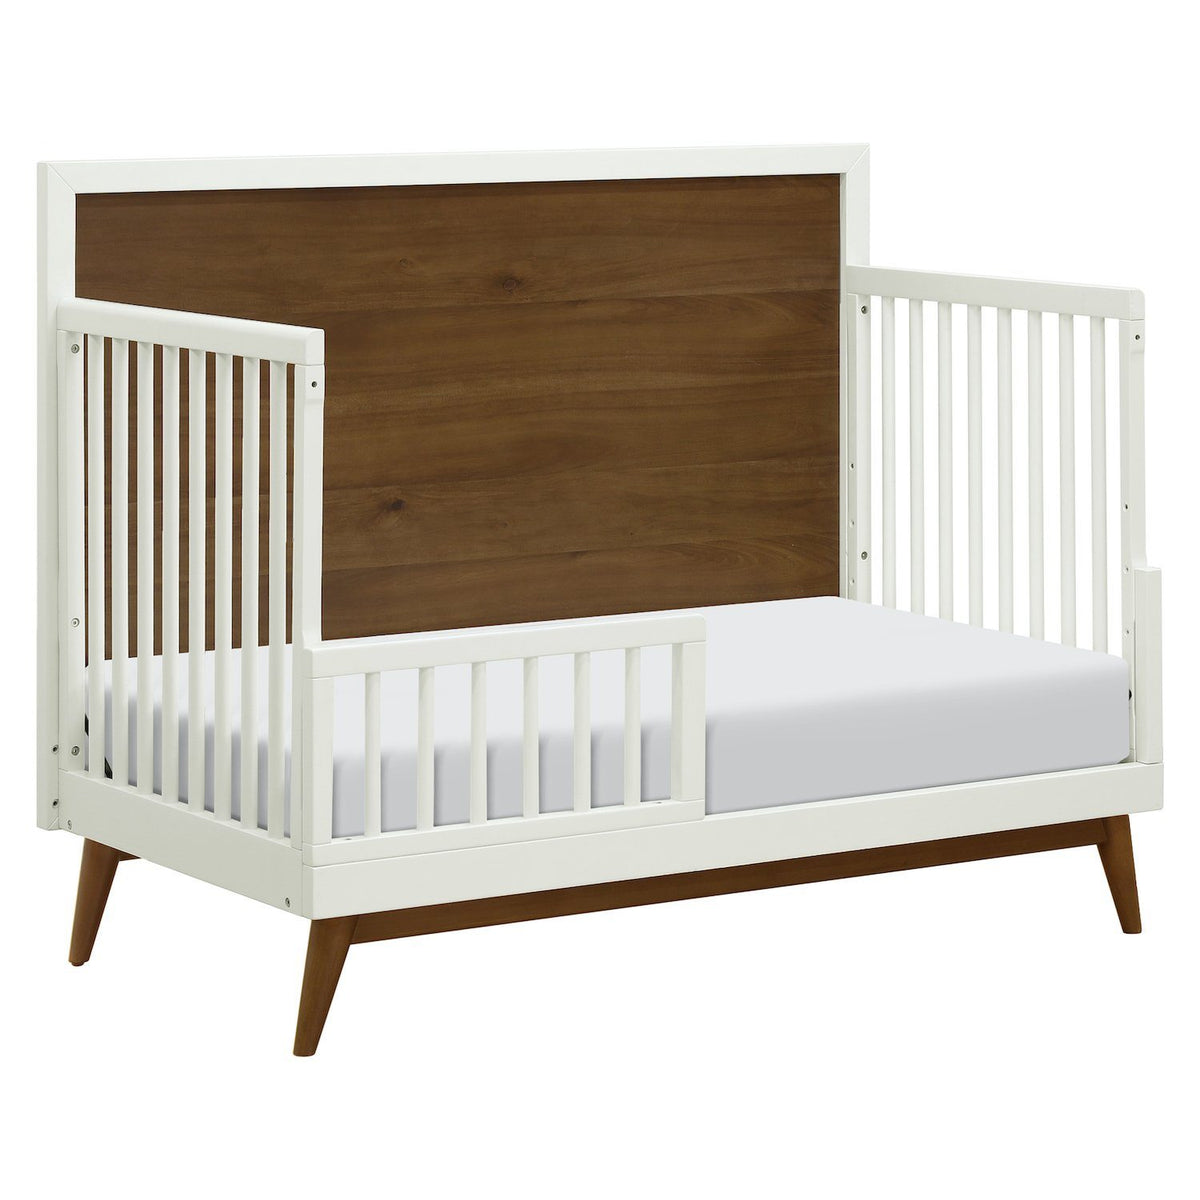 Palma 4-in-1 Convertible Crib with Toddler Bed Conversion Kit - Project Nursery